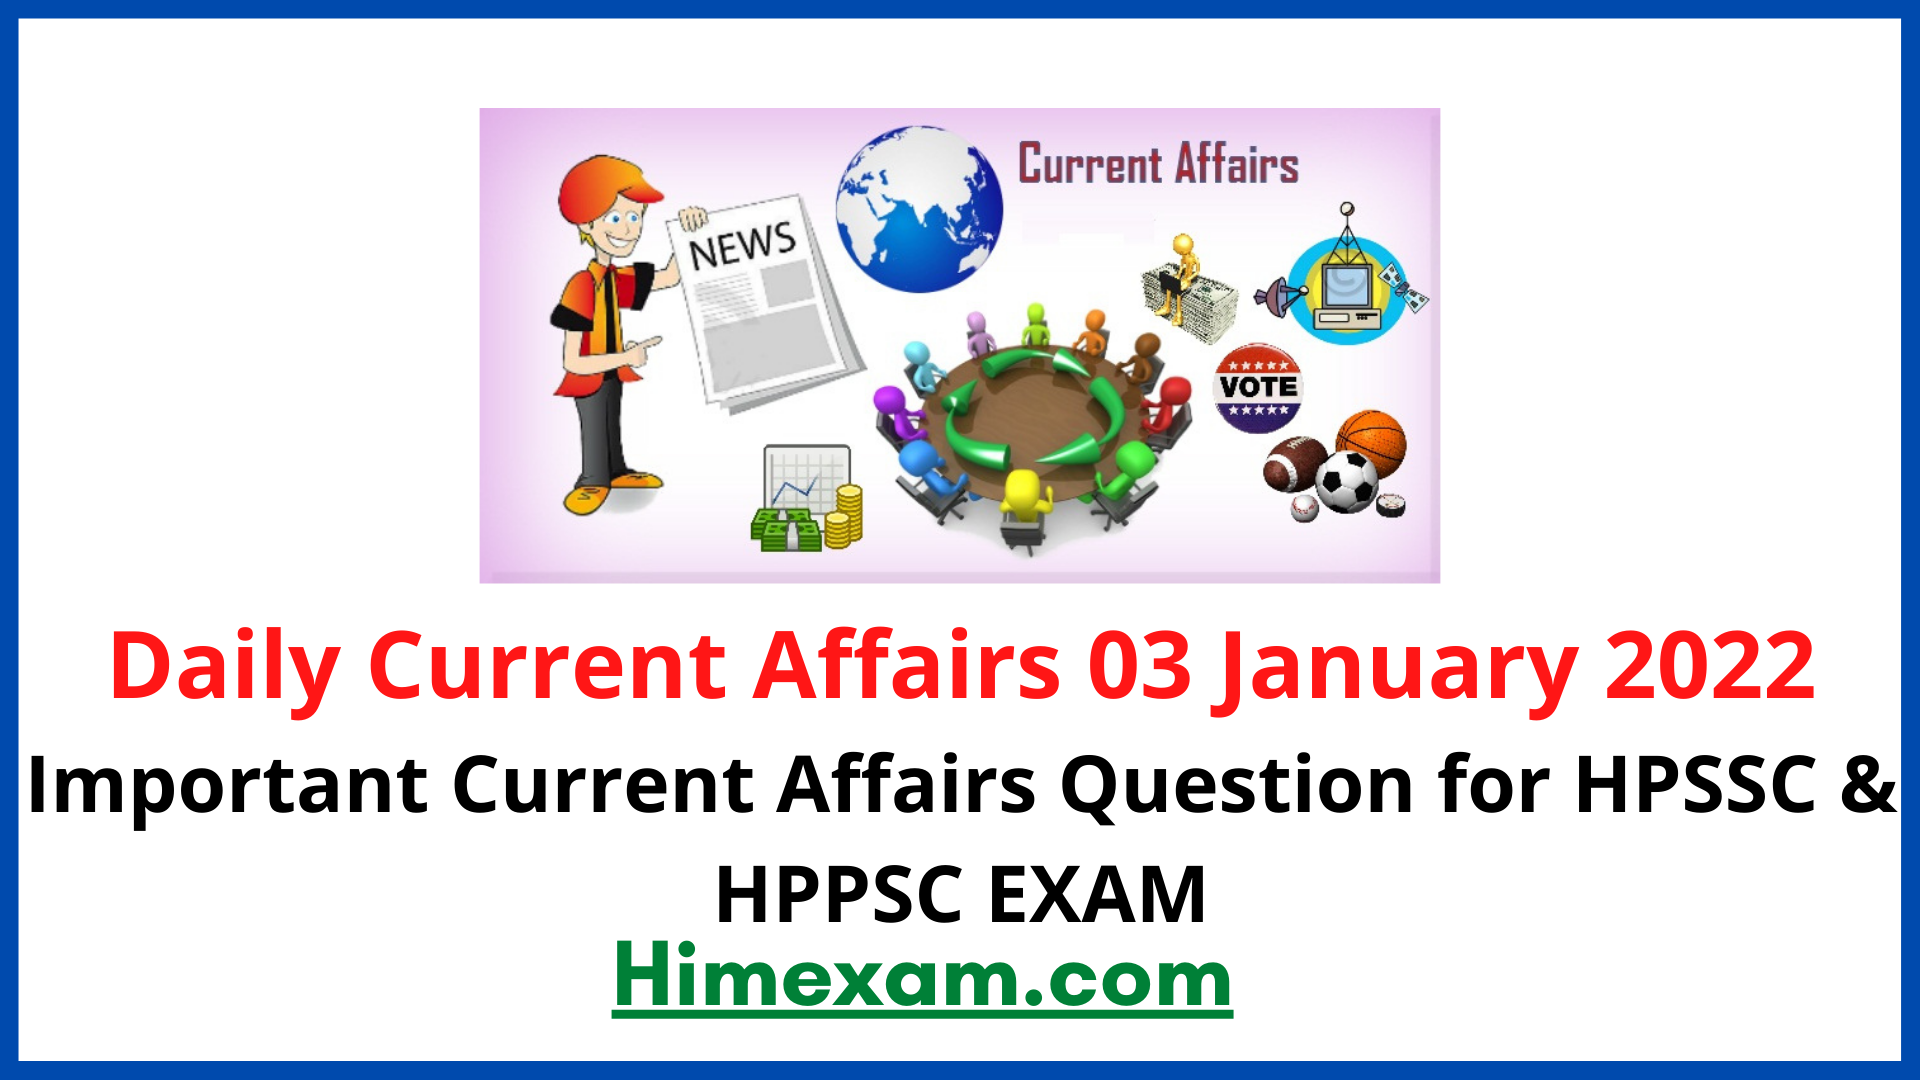 Daily Current Affairs 03 January 2022